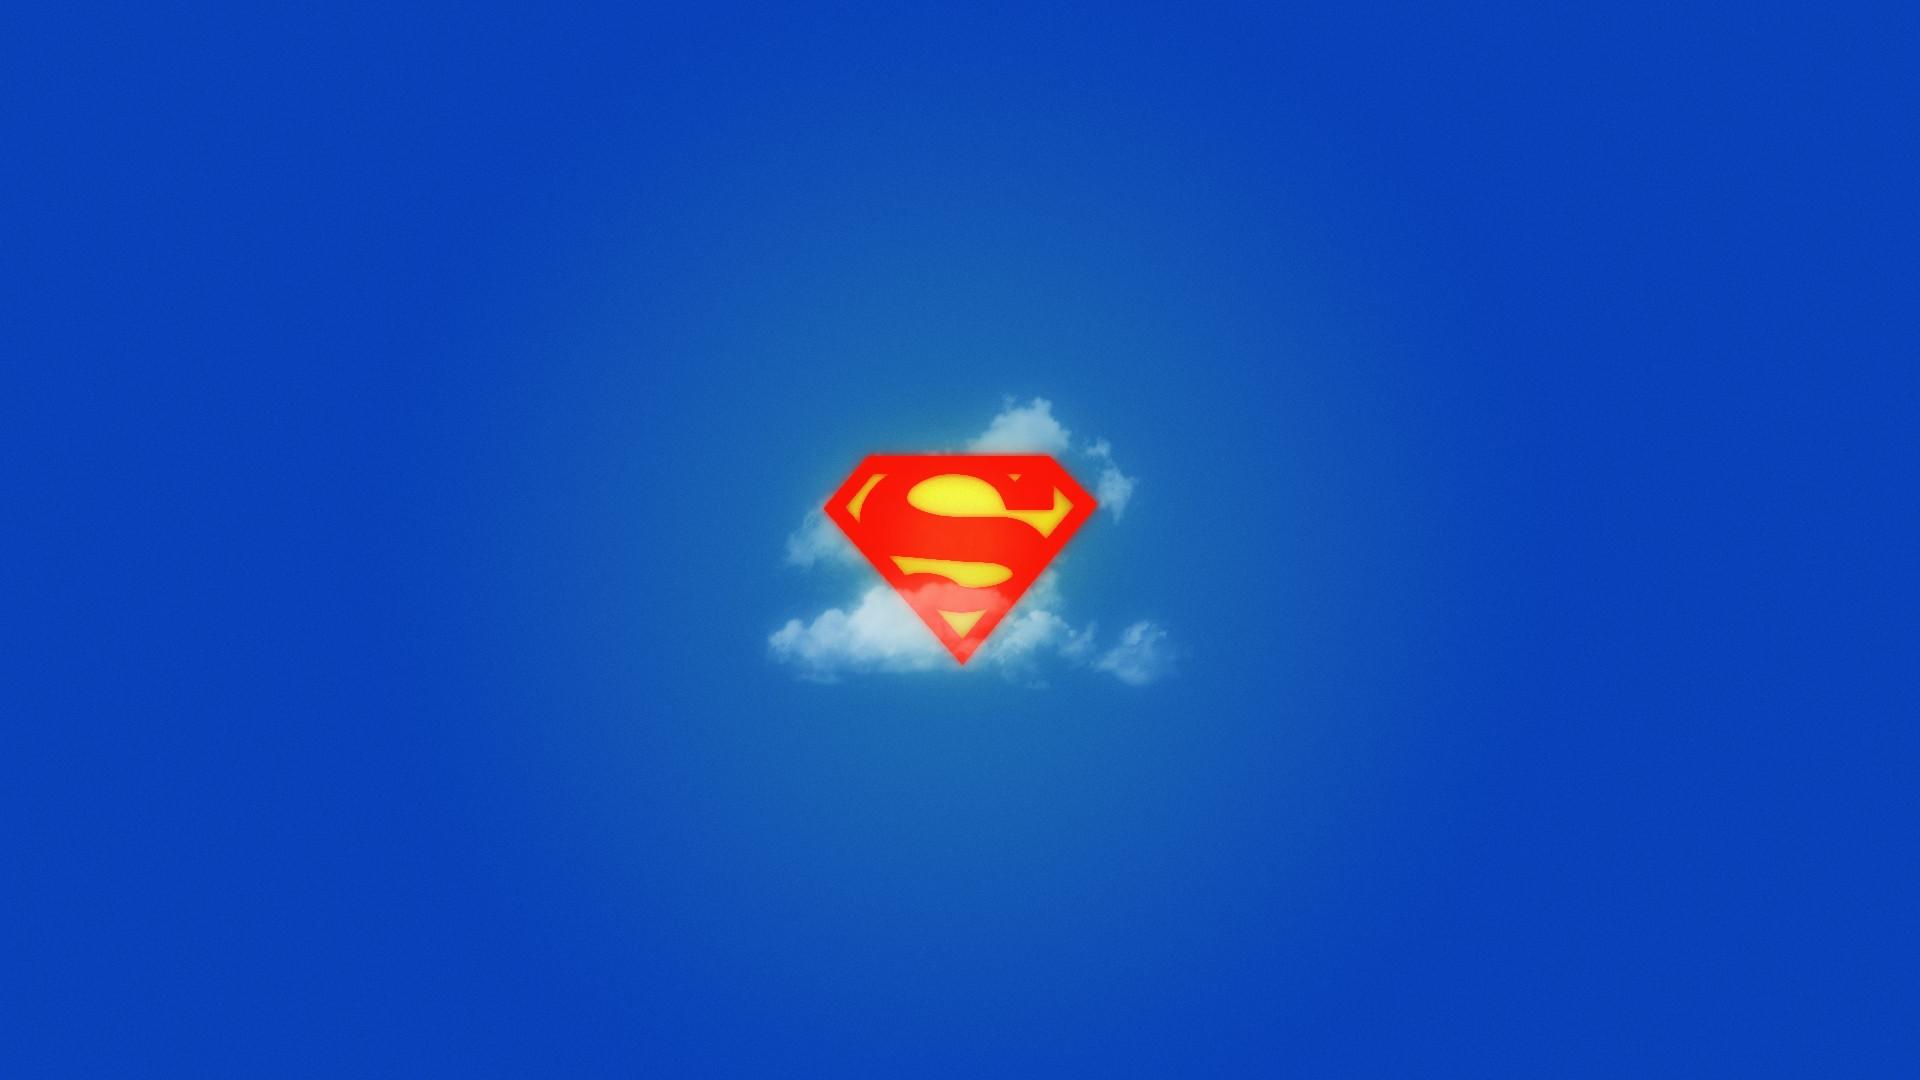 Superman Logo in Clouds Wallpaper - MixHD wallpapers